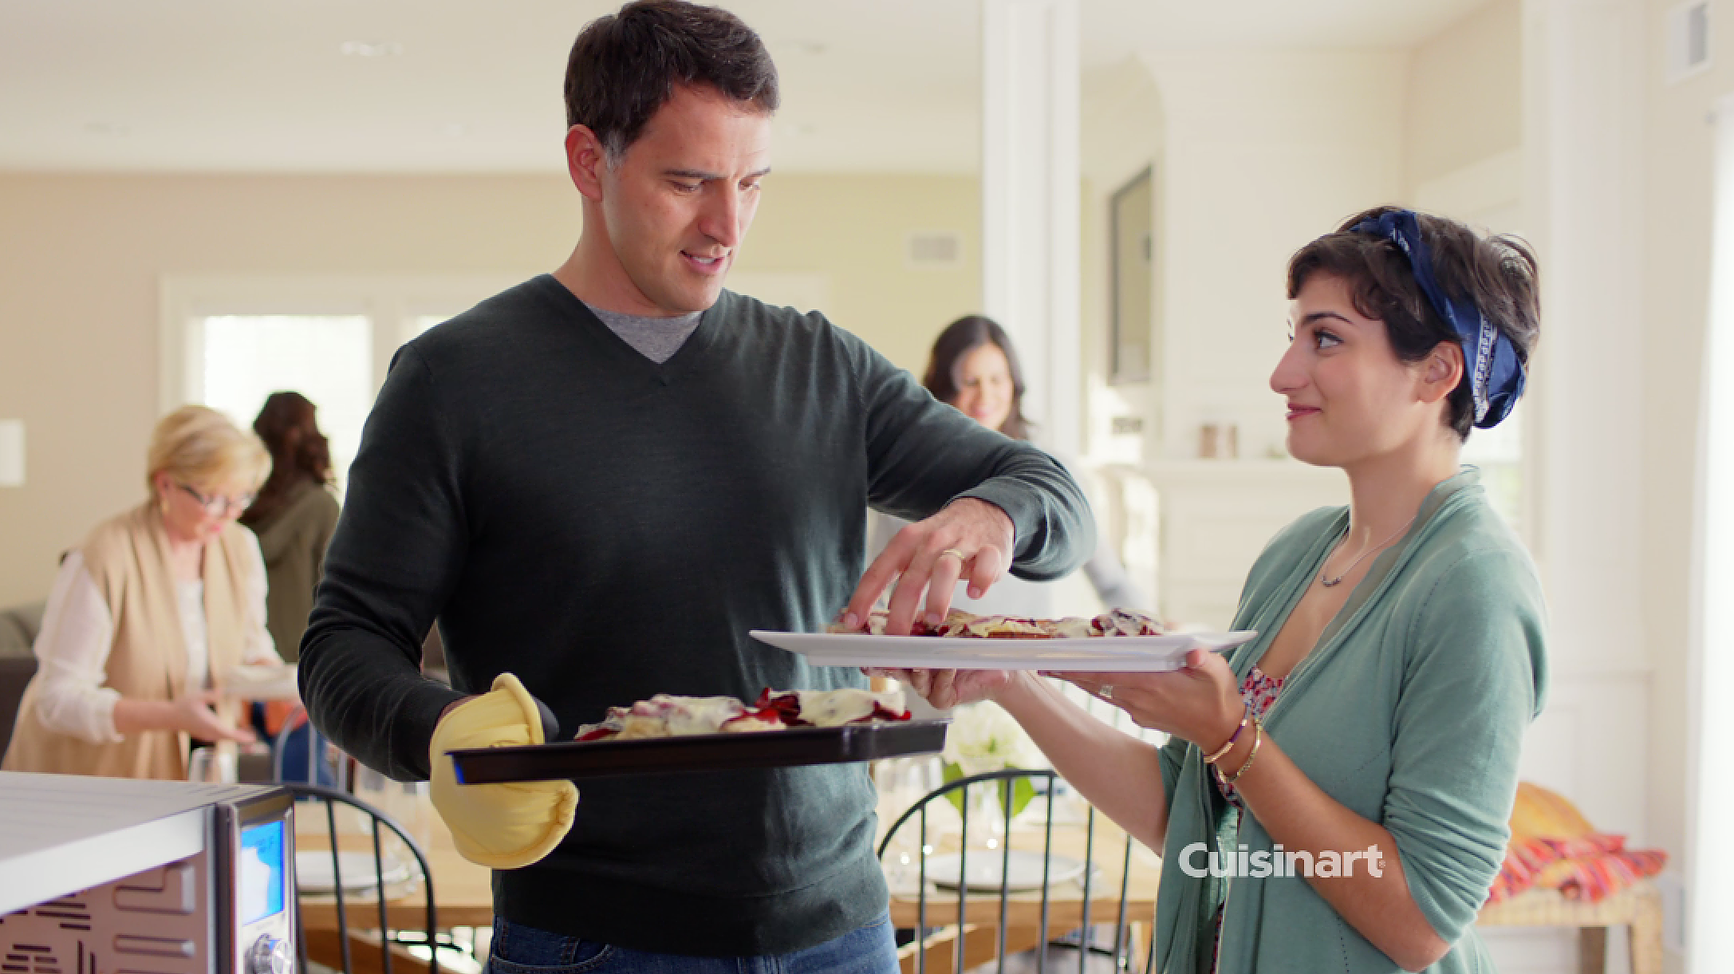  Cuisinart National Commercial 